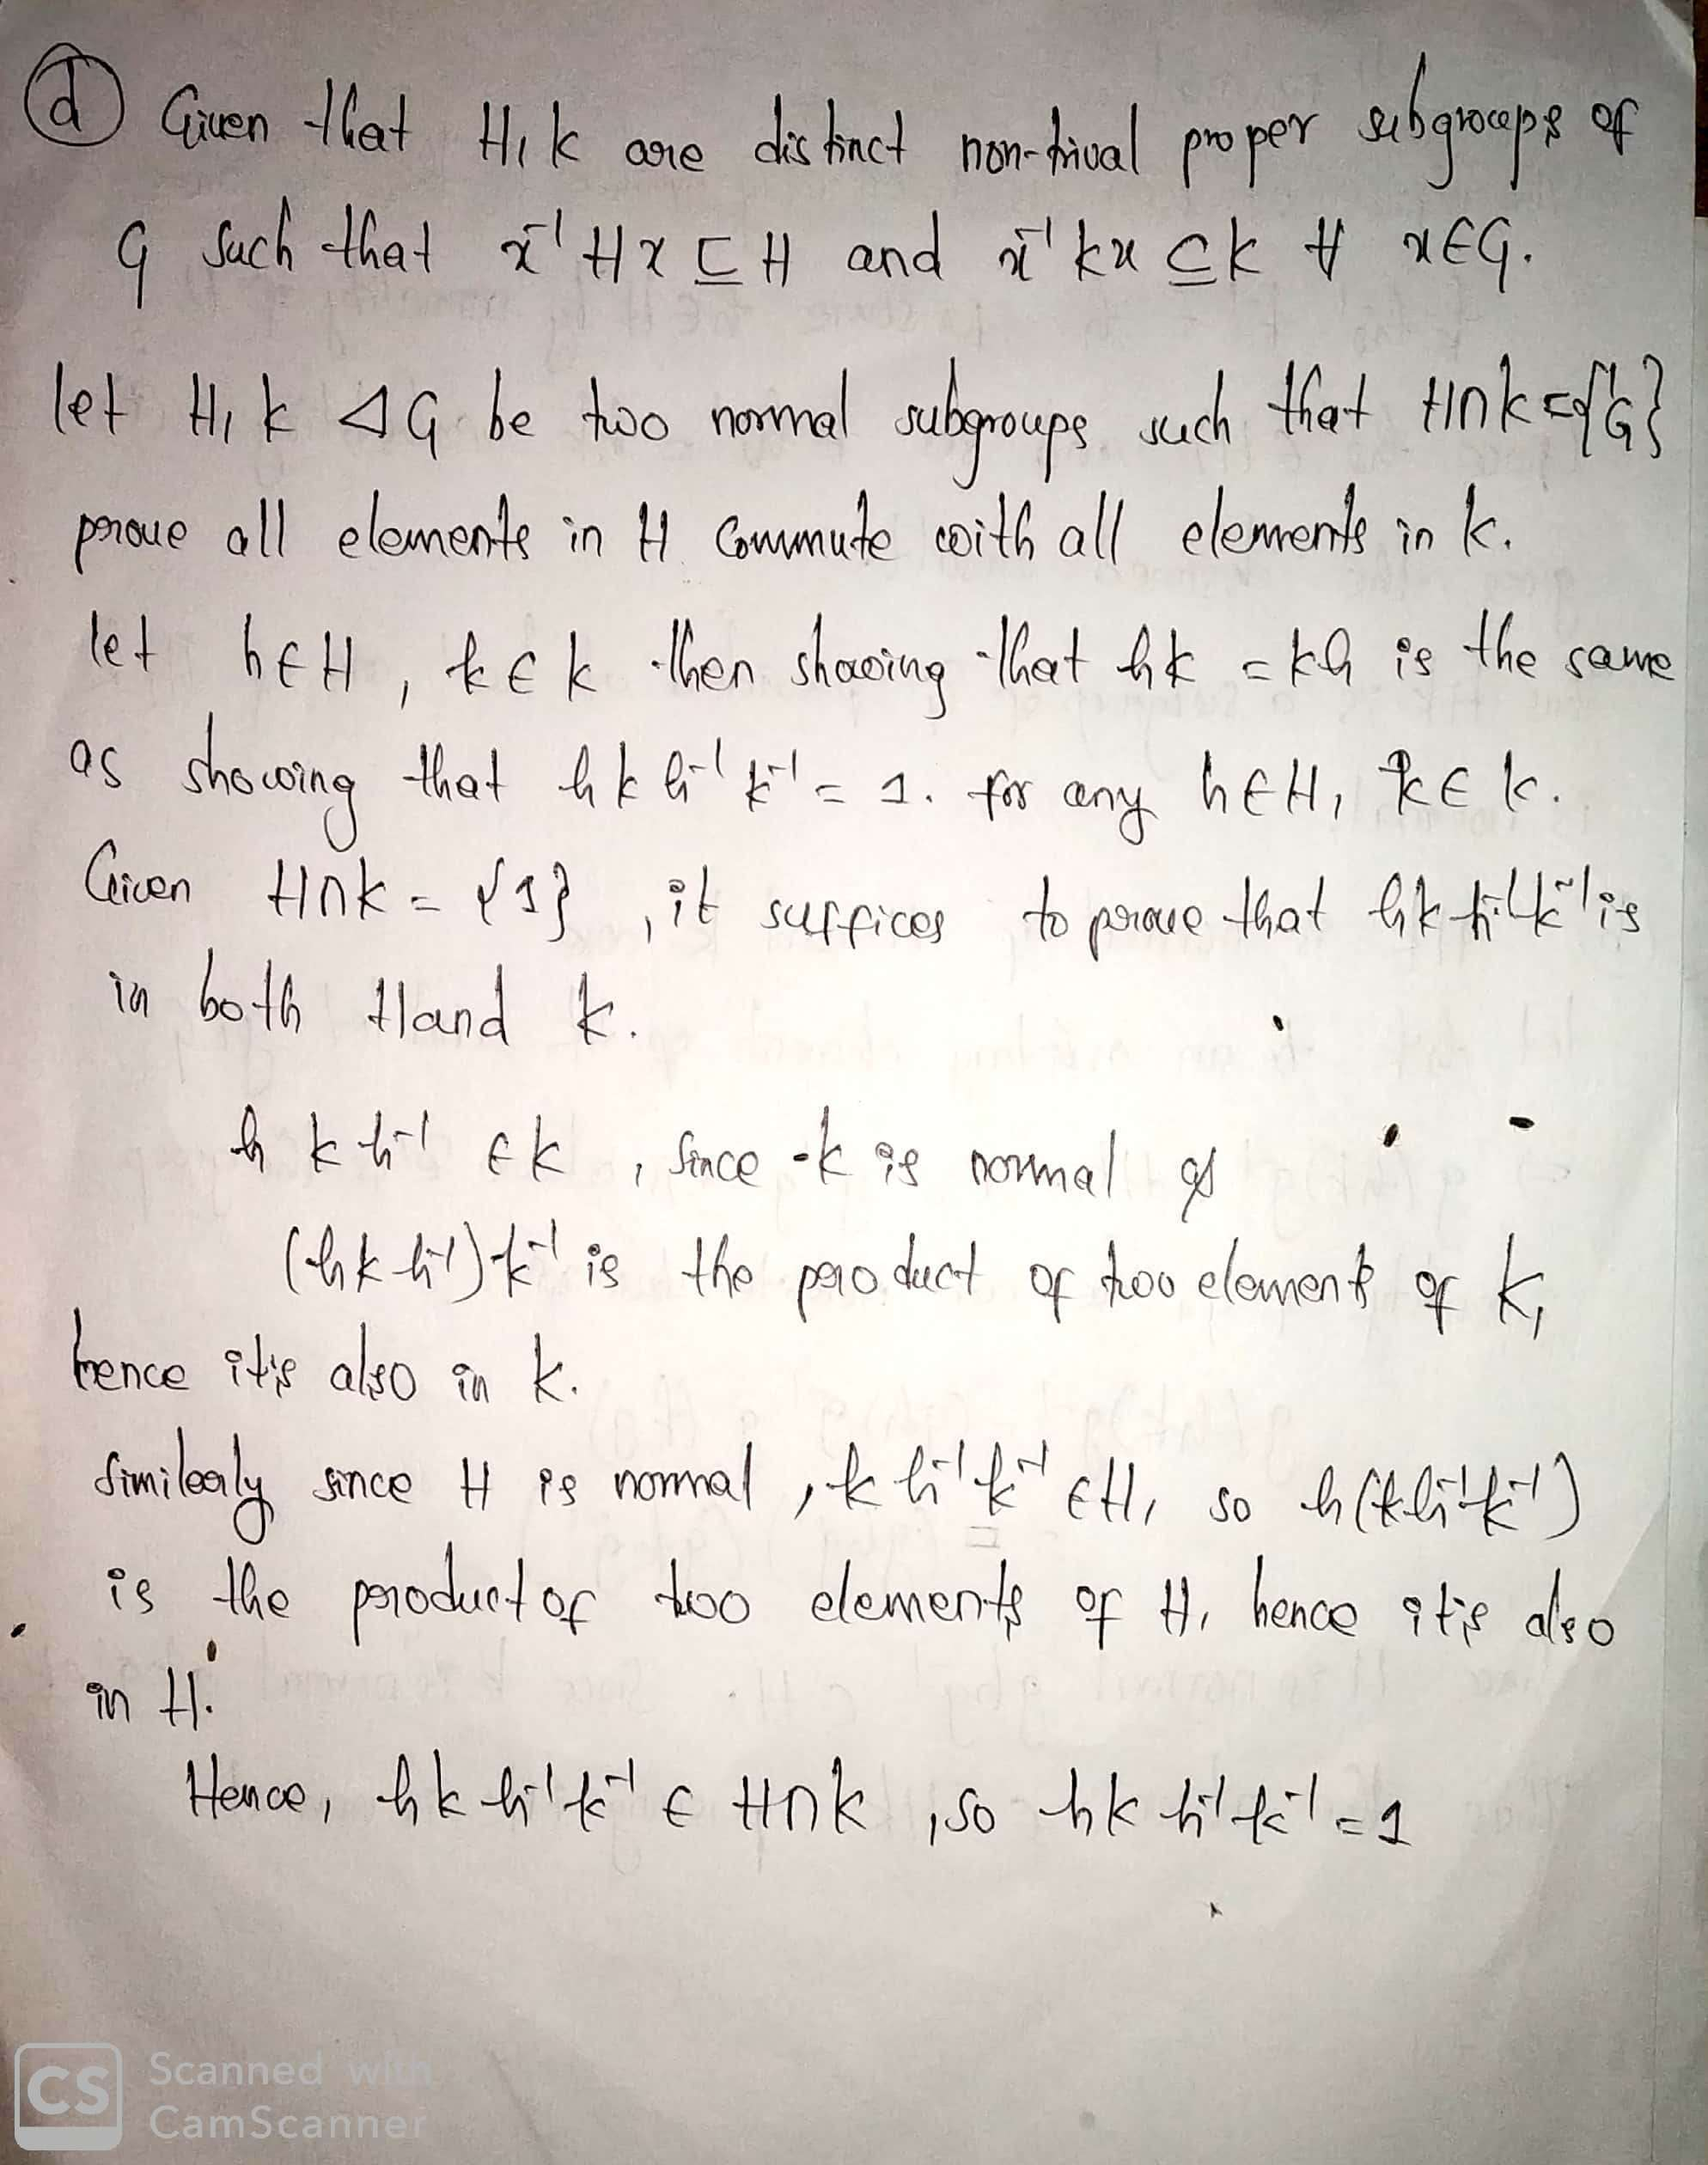 (4) (4 x 10 = 40 points) Suppose that H, K are distinct nontrivial proper subgroups of a group G such that r-'HICH and r-'KICK for all 1 E G. (a) Is the set HK a subgroup of G? If yes, prove that it is really a subgroup. If no, explain why. (b) Prove that RXYsQp